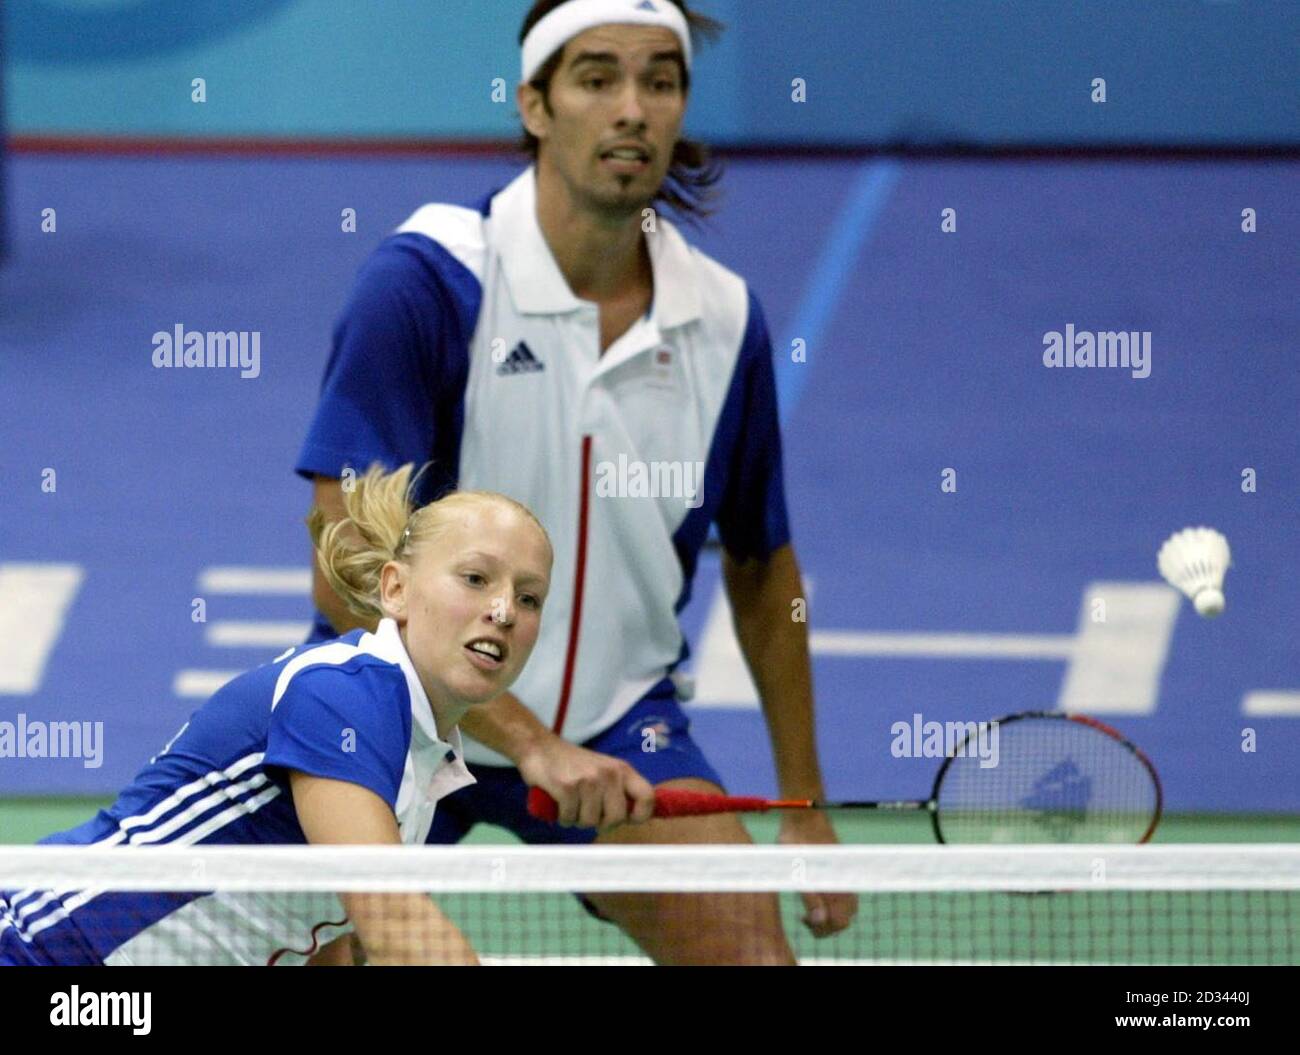 British badminton Silver Medal winners Nathan Robertson and Gail Emms during their Gold Medal Mixed Doubles match at the Goudi Olympic Hall in Athens, Greece. Emms and Robertson lost to China's Jun Zhang and Ling Gao 1-15  15-12  12-15.   Stock Photo